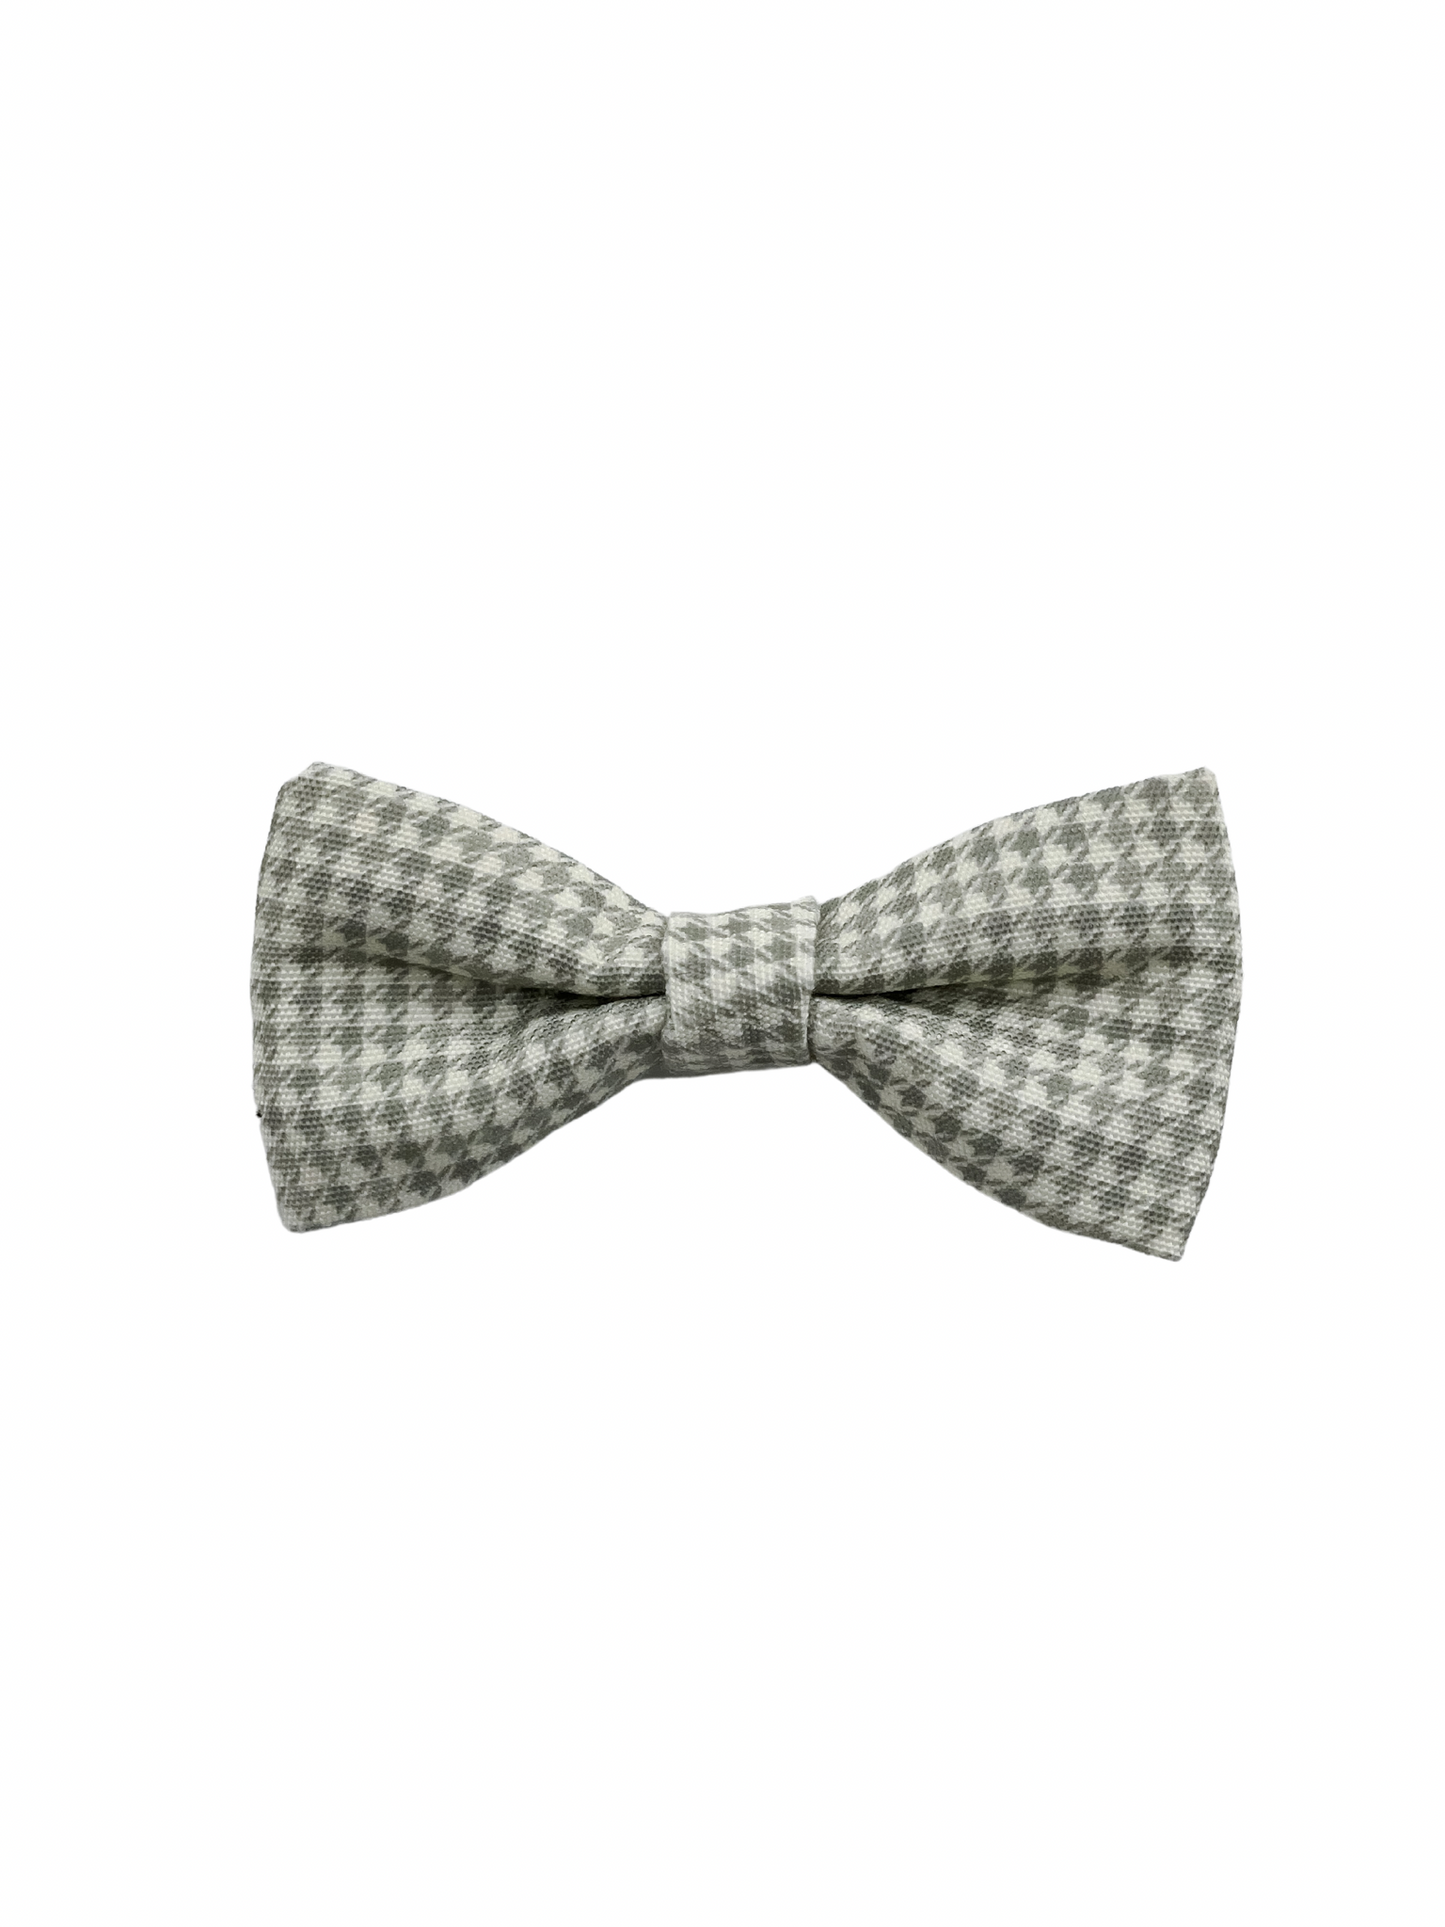 Dog Bow tie | Sage you love me